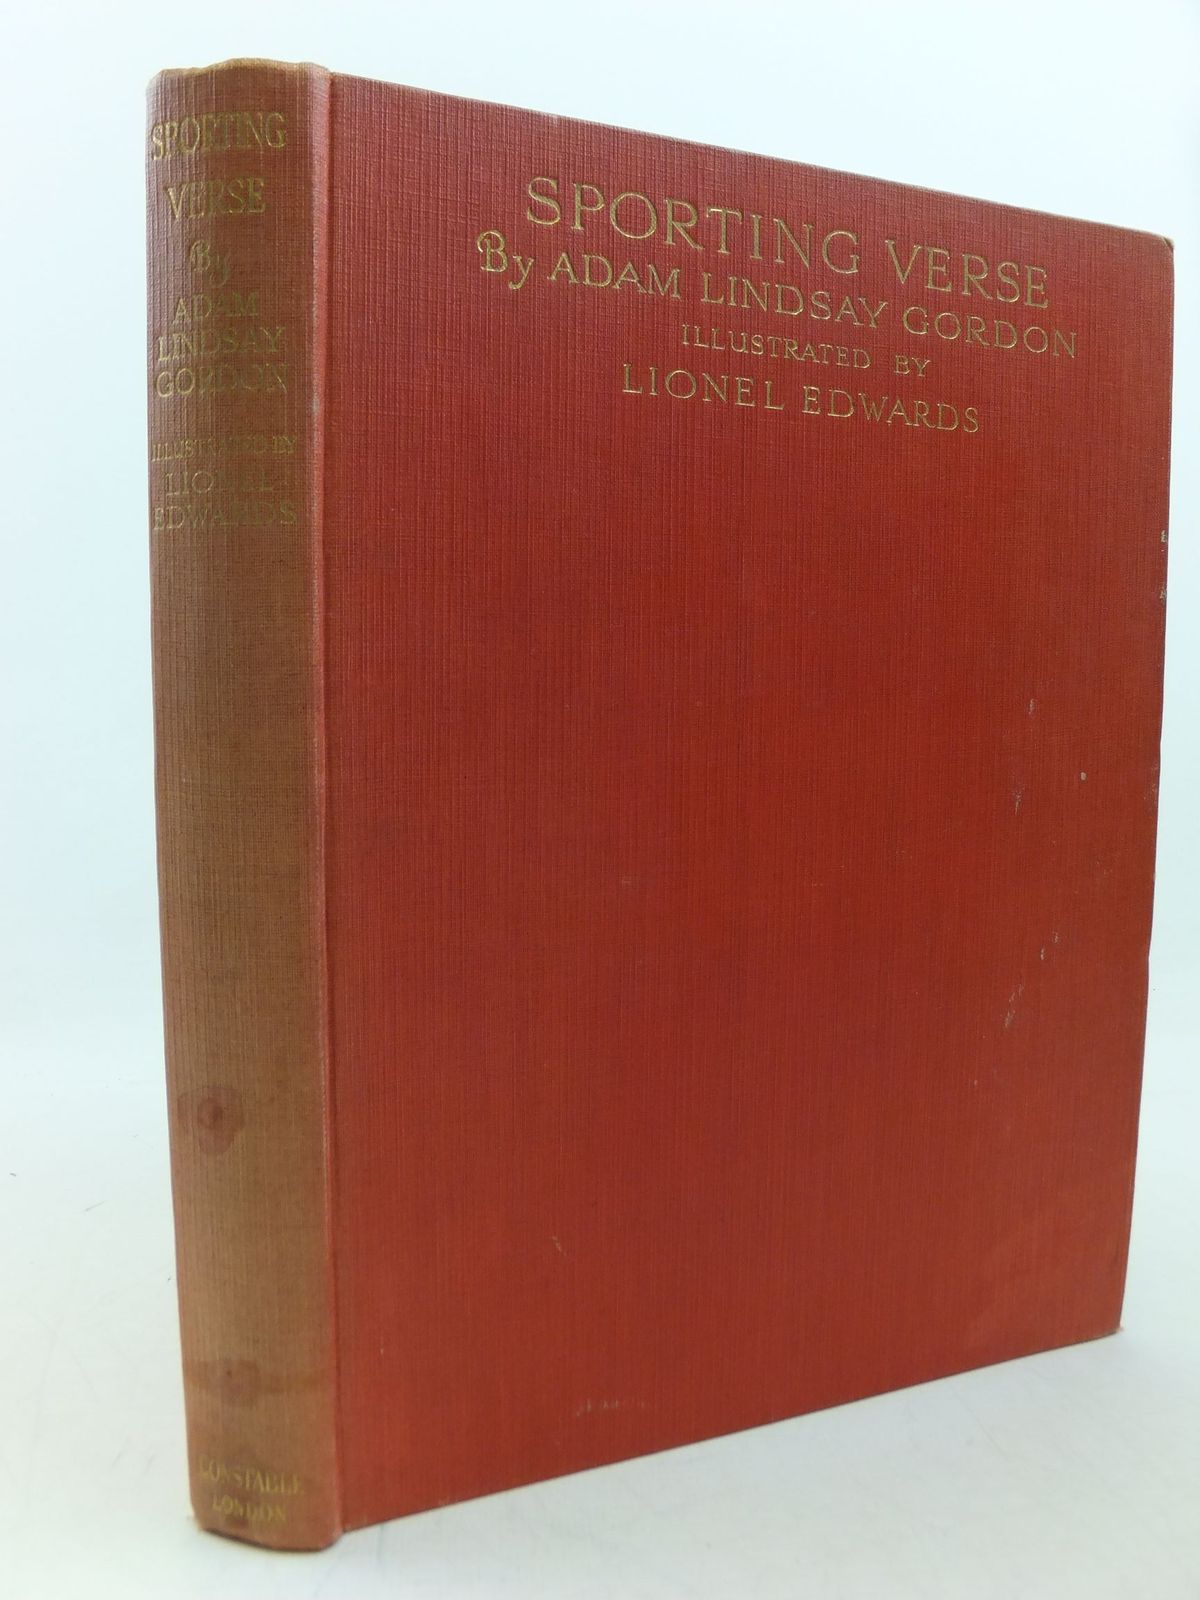 Photo of SPORTING VERSE written by Gordon, Adam Lindsay illustrated by Edwards, Lionel published by Constable &amp; Co. Ltd. (STOCK CODE: 2113378)  for sale by Stella & Rose's Books